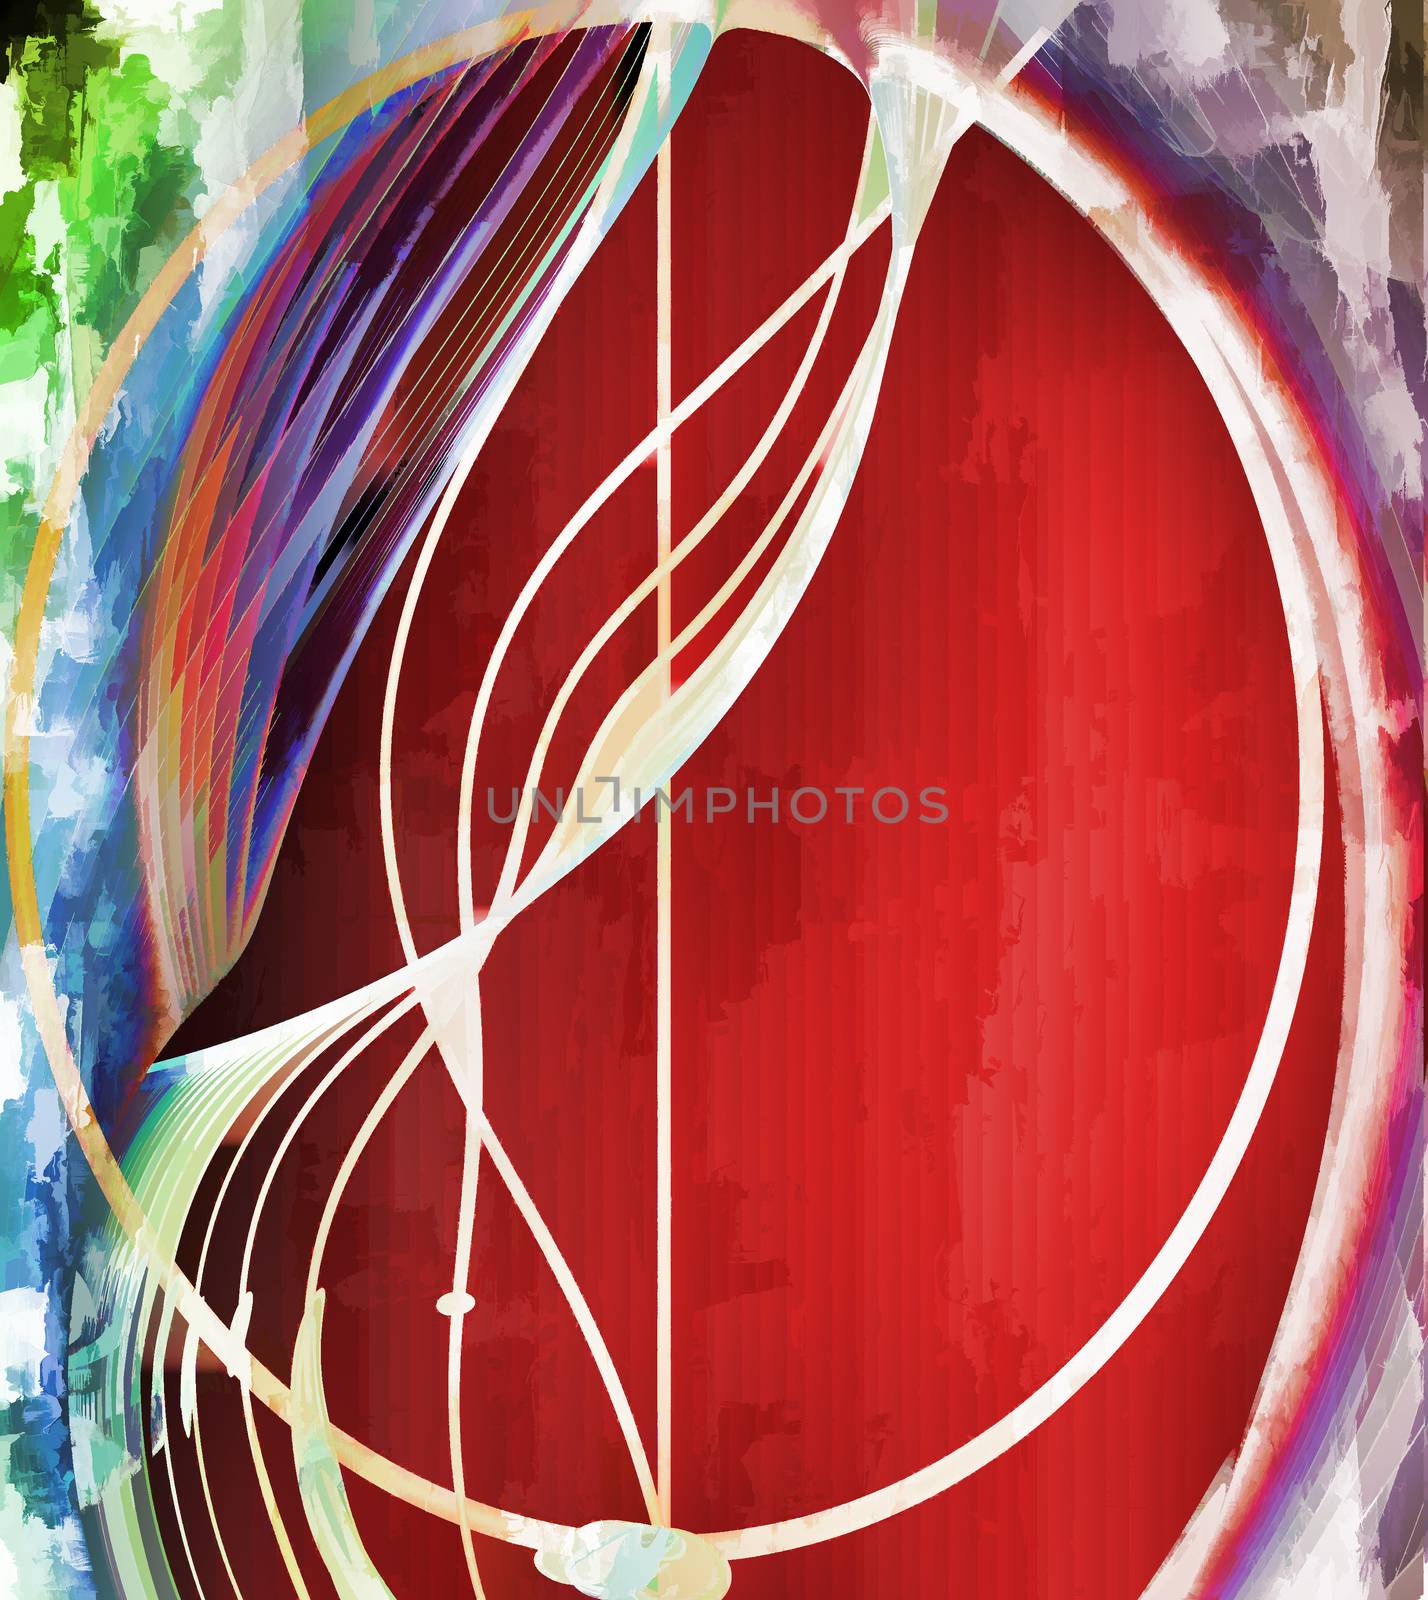 Abstract image with fancy pattern of bright colors in art Nouveau style. Imitation oil painting.